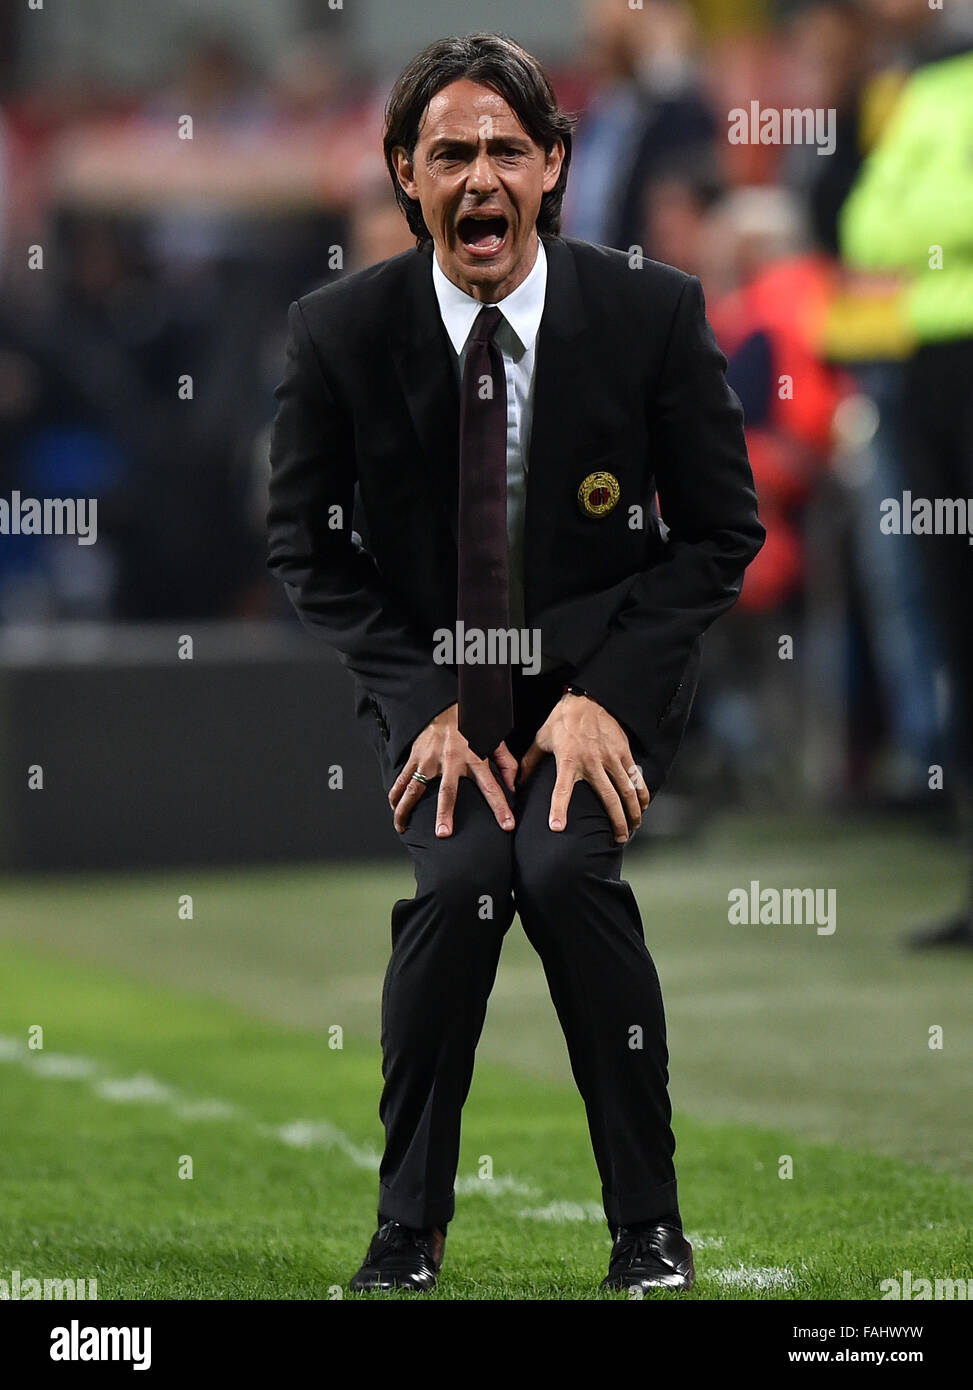 XINHUA SPORTS PHOTOS OF THE YEAR 2015 TRANSMITTED ON Dec. 31, 2015 AC Milan's coach Filippo Inzaghi gestures during the Italian Serie A soccer match against Sampdoria at the San Siro stadium in Milan on April 12, 2015. The match ended with a 1-1 draw.(Xinhua/Alberto Lingria) (wll) Stock Photo